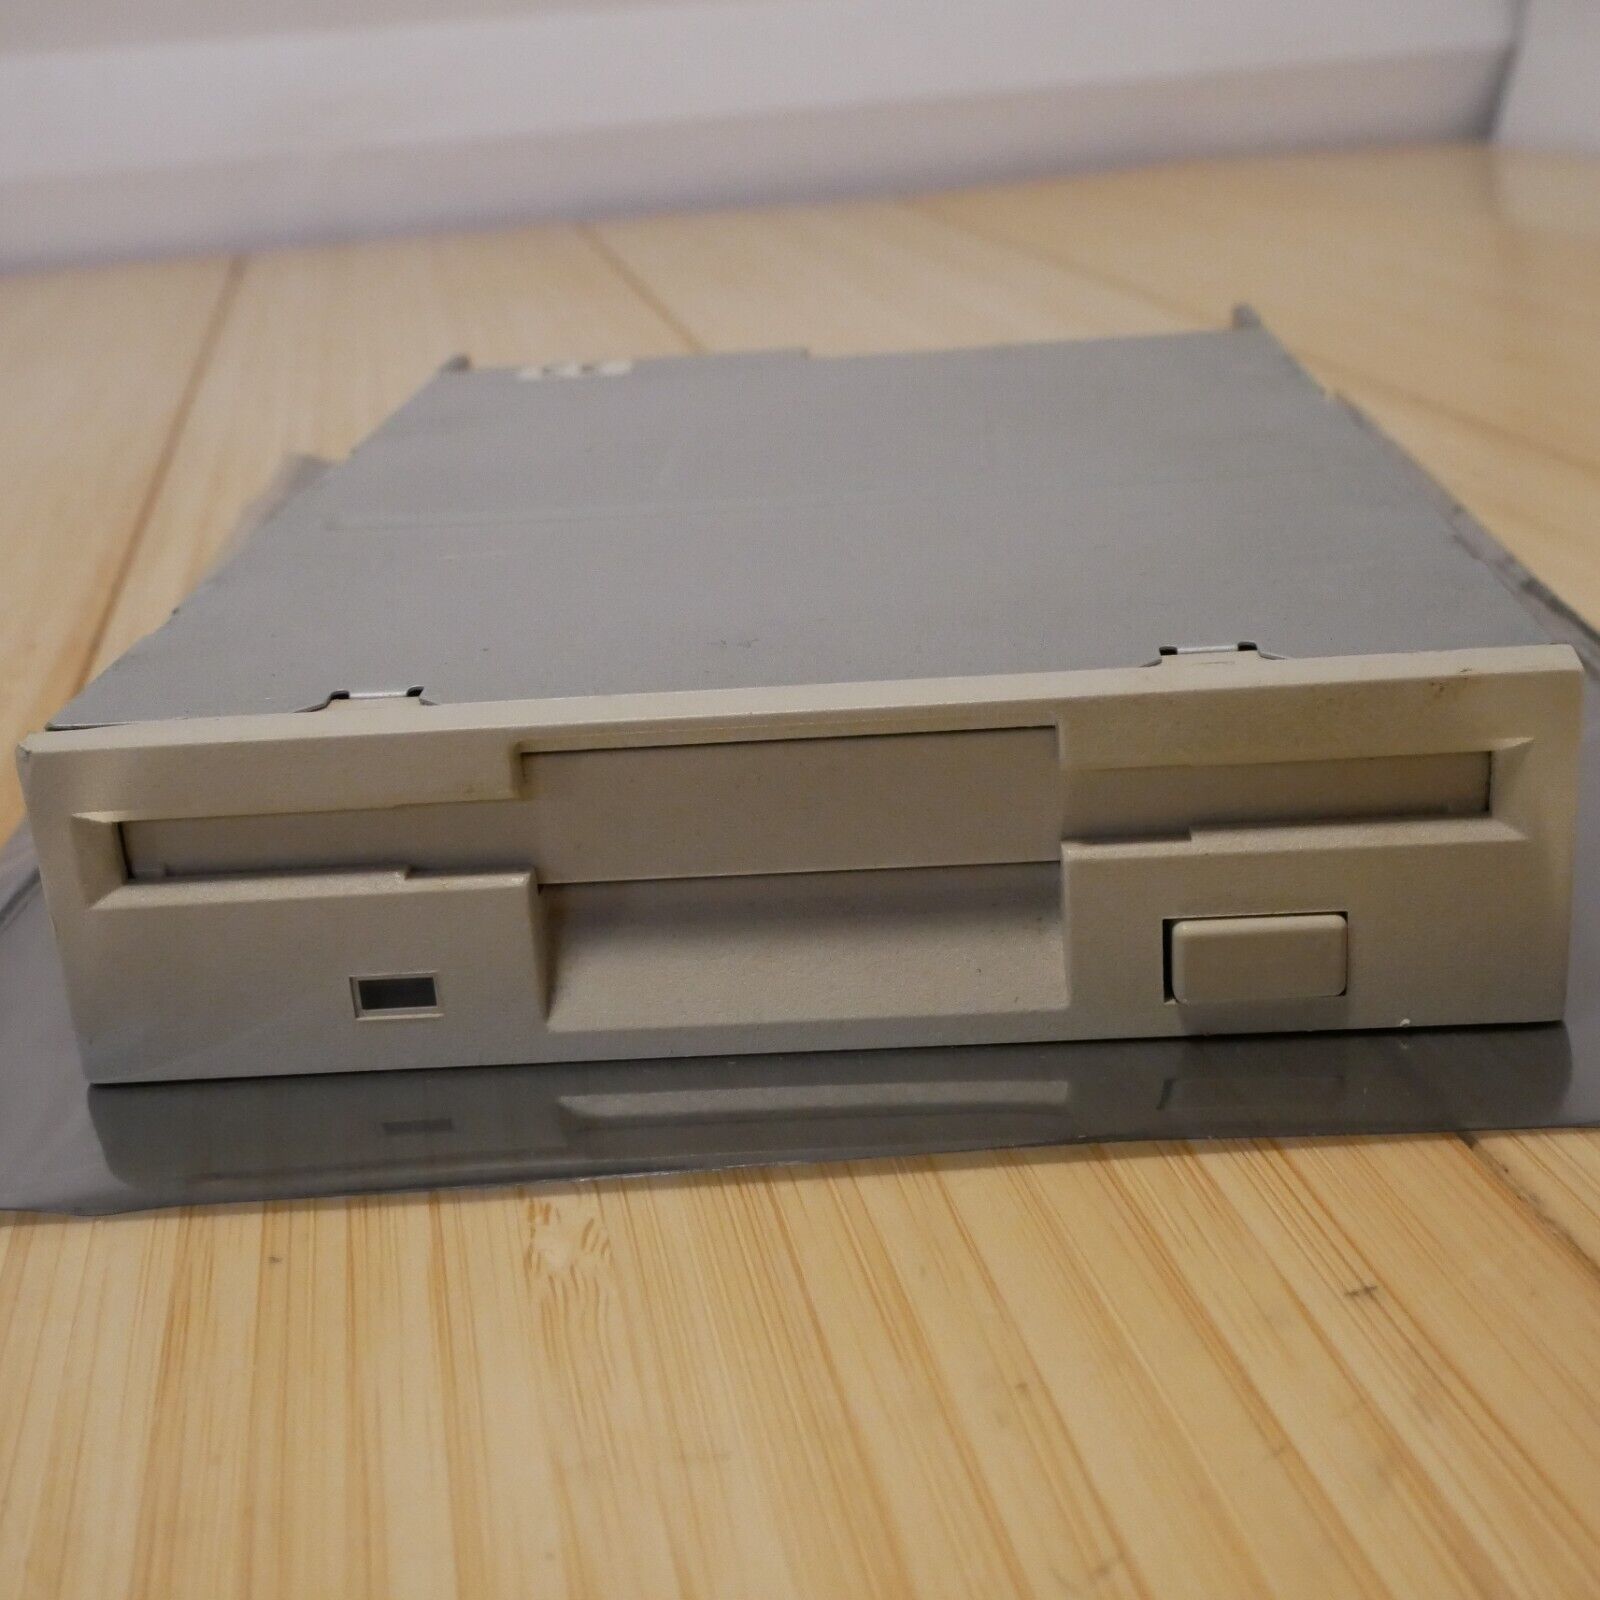 Primary image for TEAC 3.5 inch Internal Floppy Disk Drive Model FD-235HF Tested & Working - 18